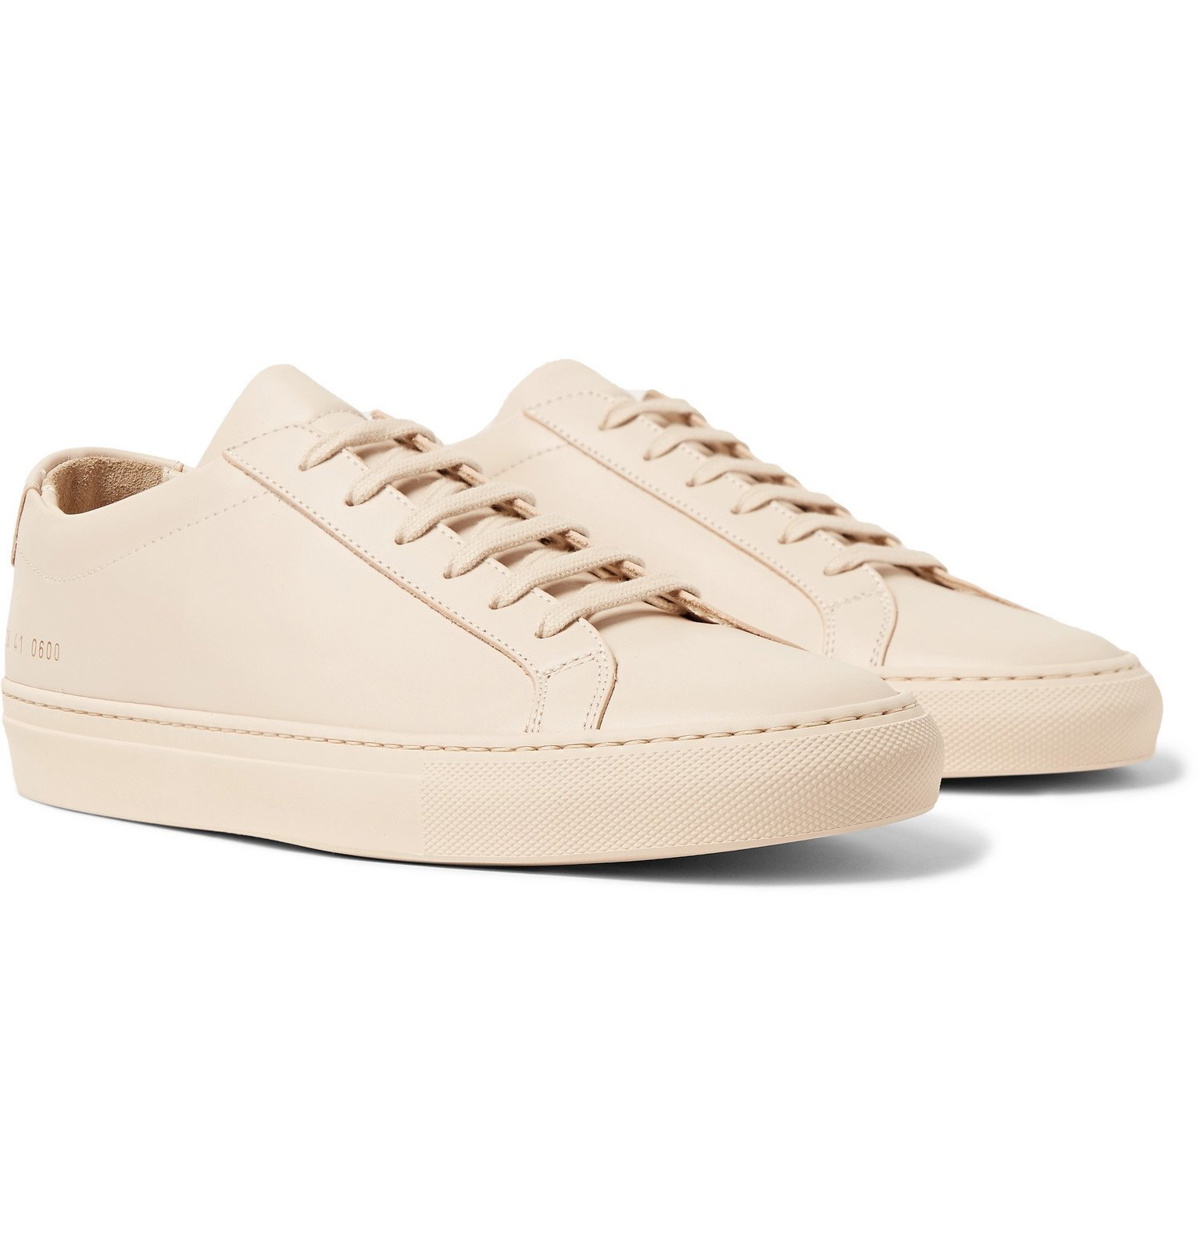 Common Projects Original Achilles Leather Sneakers - Pink Projects